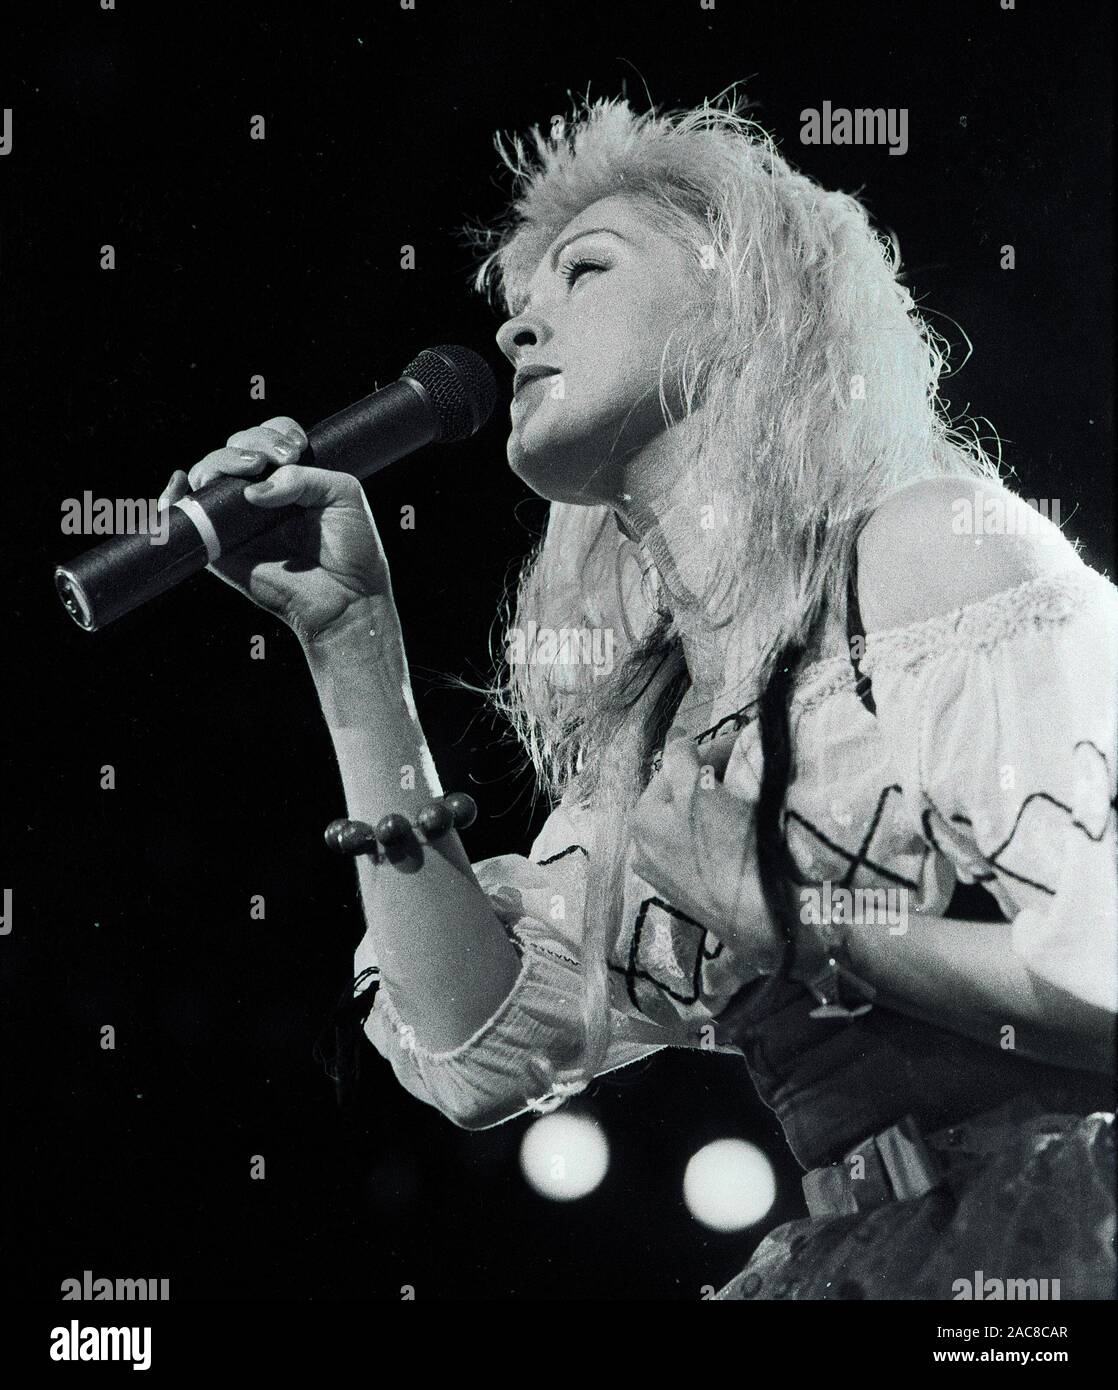 Cyndi Lauper singing in the  “True Colors” tour concert at the Worcester Centruim in worcester Ma USA 1980’s photo by bill belknap Stock Photo